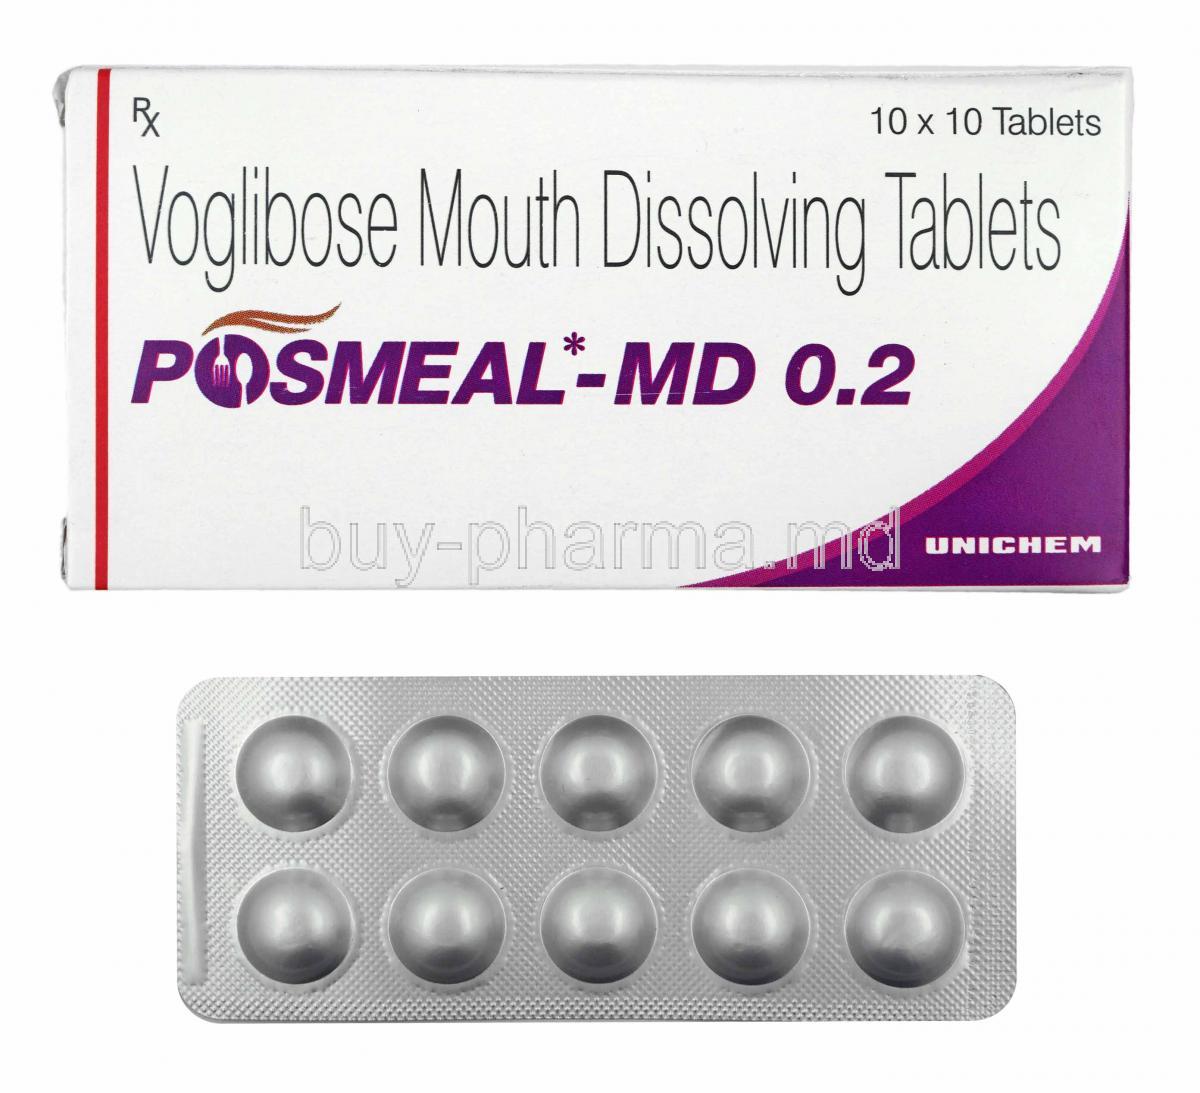 Posmeal-MD, Voglibose 0.2mg box and tablets